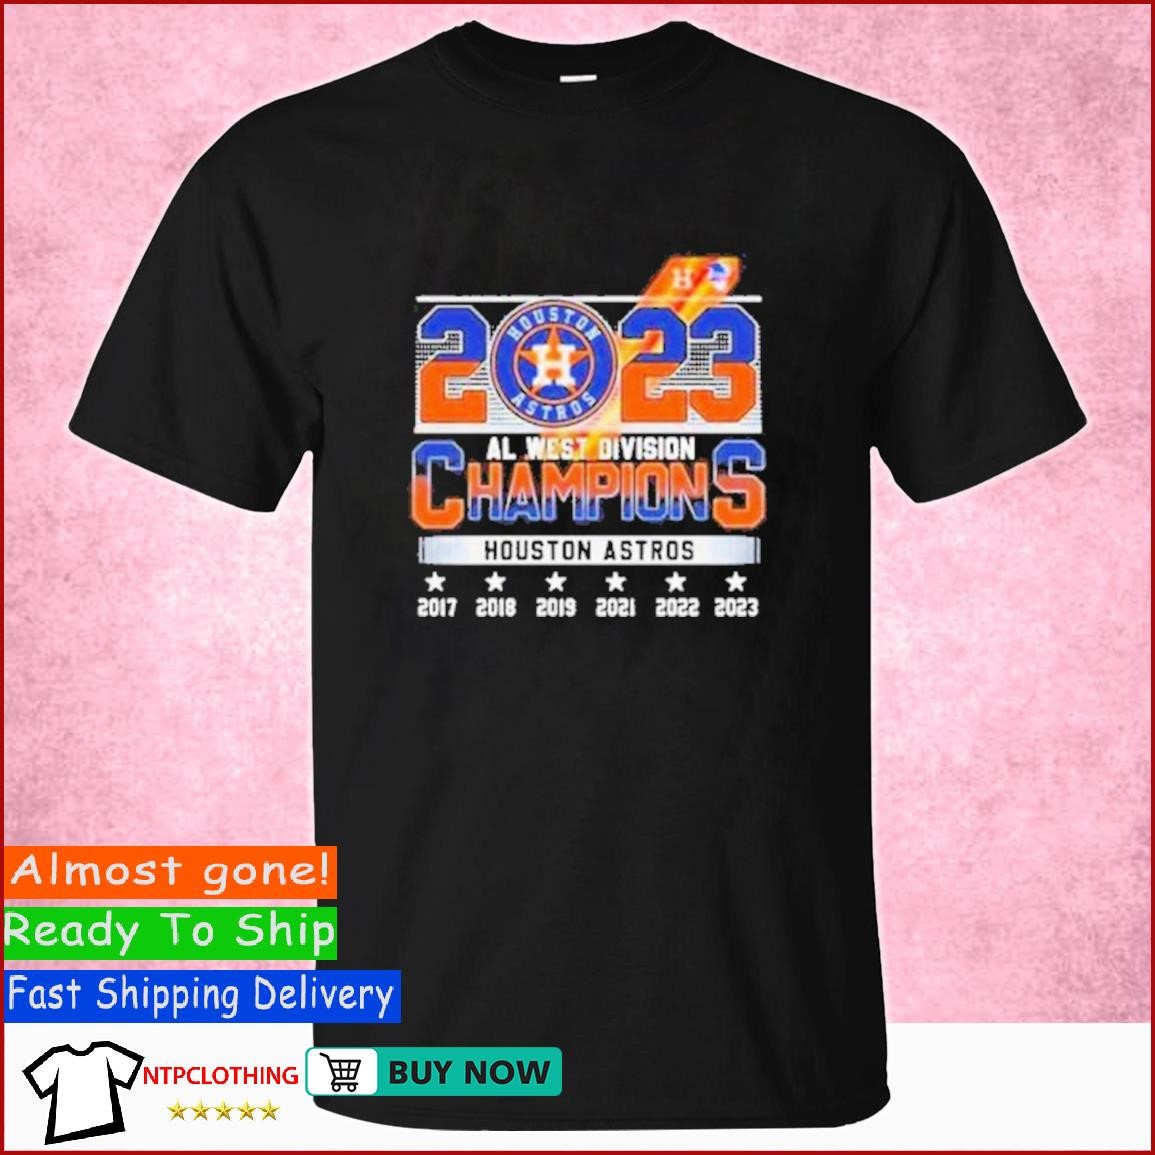 T-Shirts of Houston Astros for Men, Women and Youth